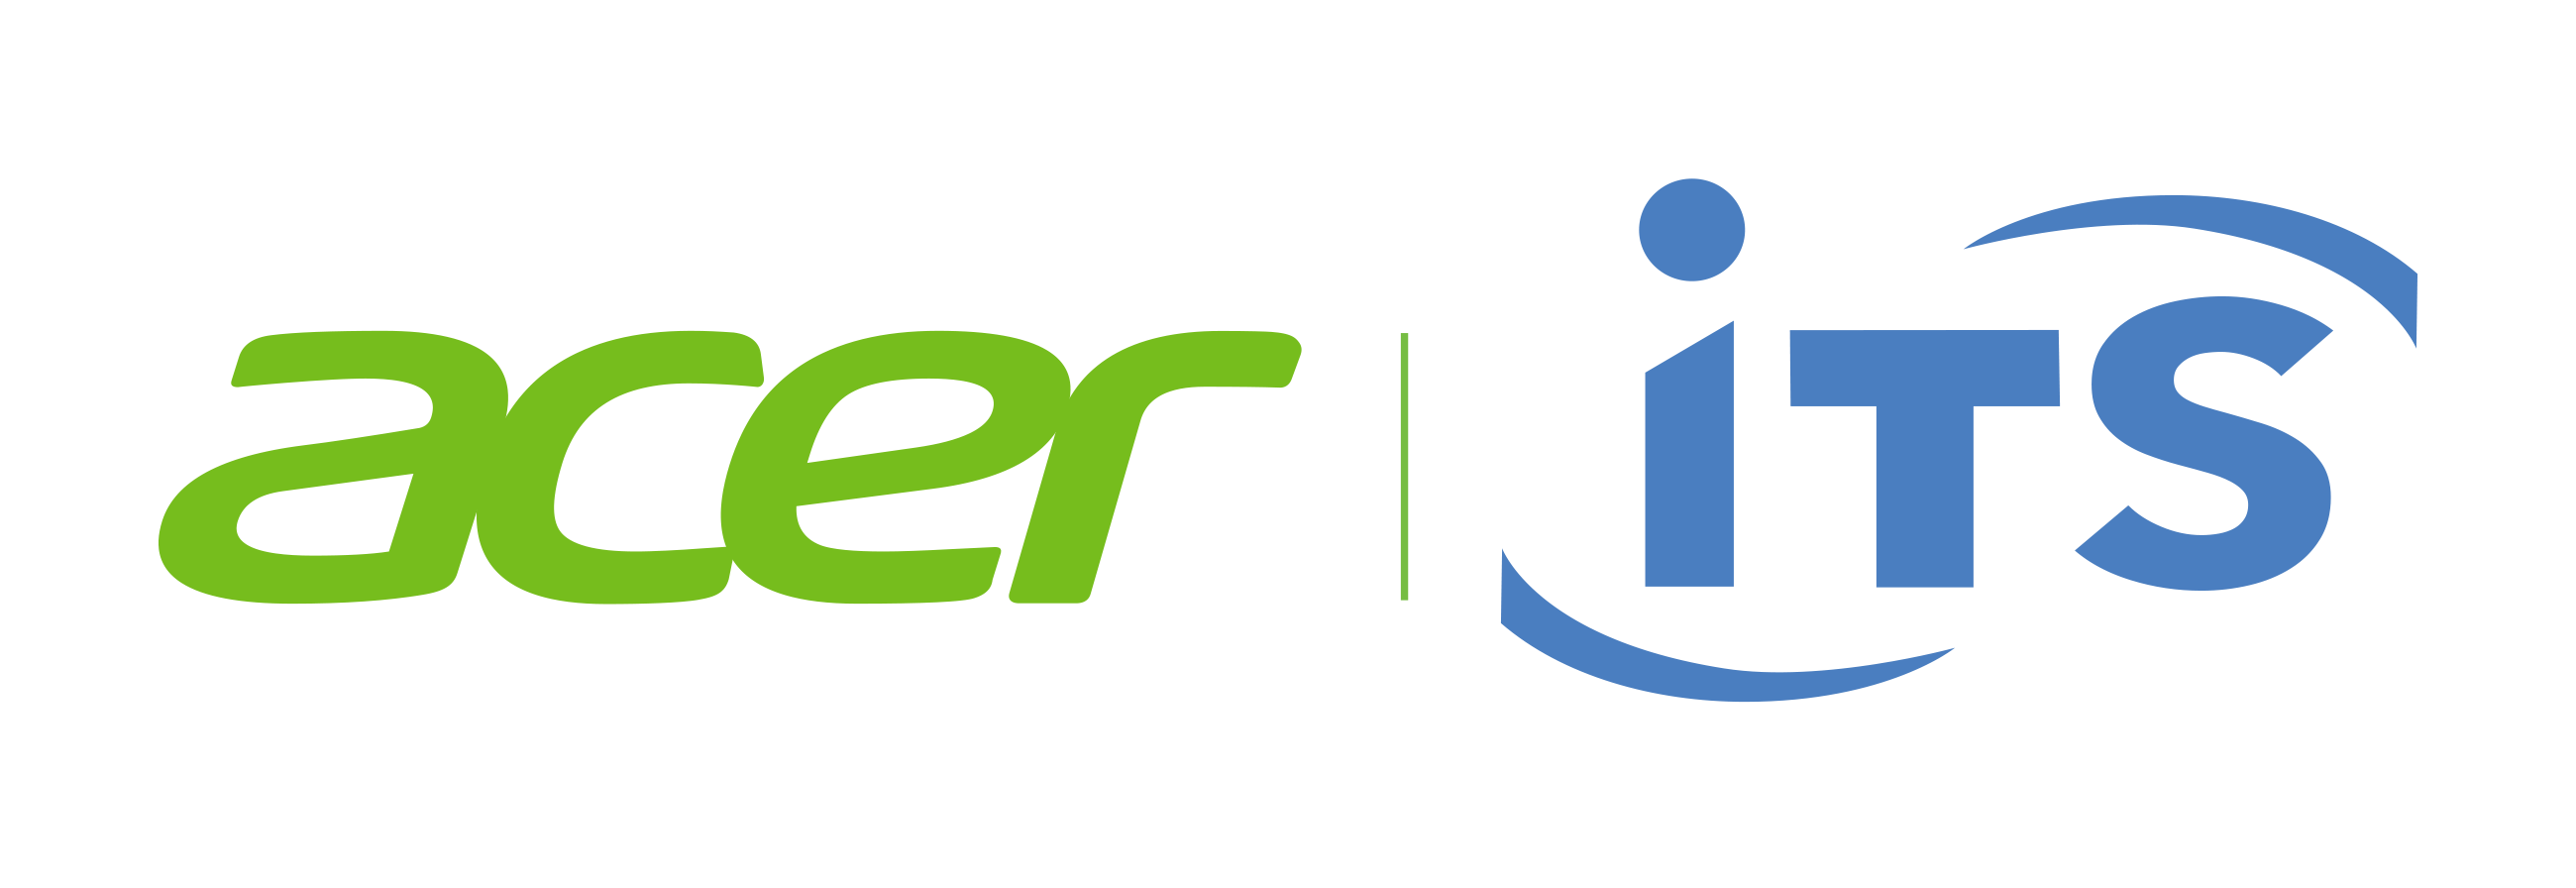 Acer ITS Incorporated